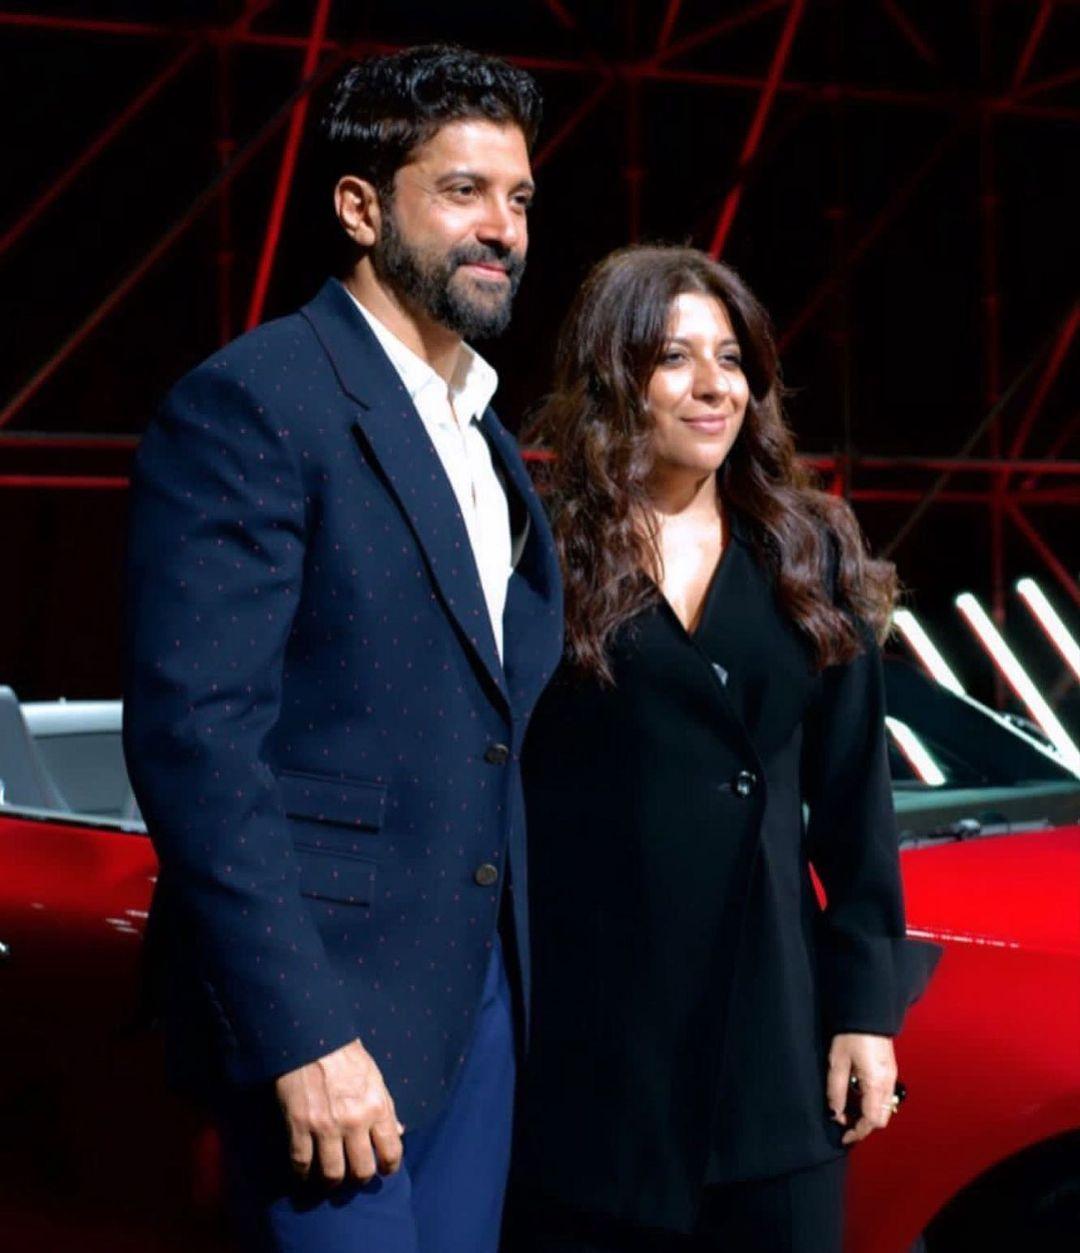 Farhan Akhtar and Zoya Akhtar's pictures depict all things love